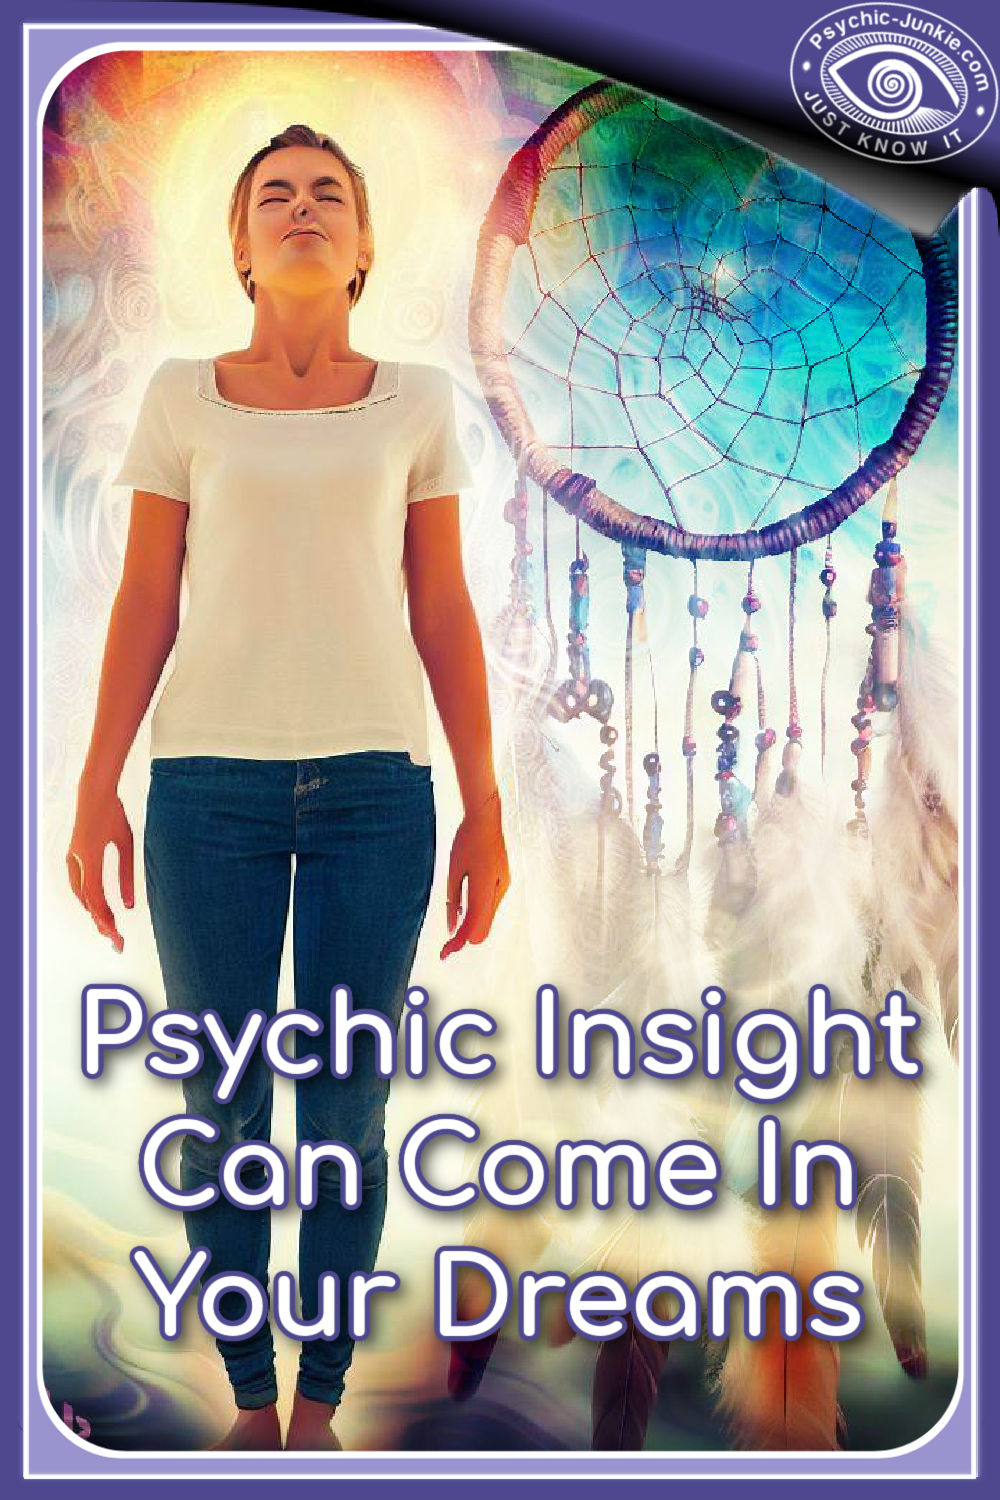 Your First Signs Of Being Psychic May Come Through Dreams